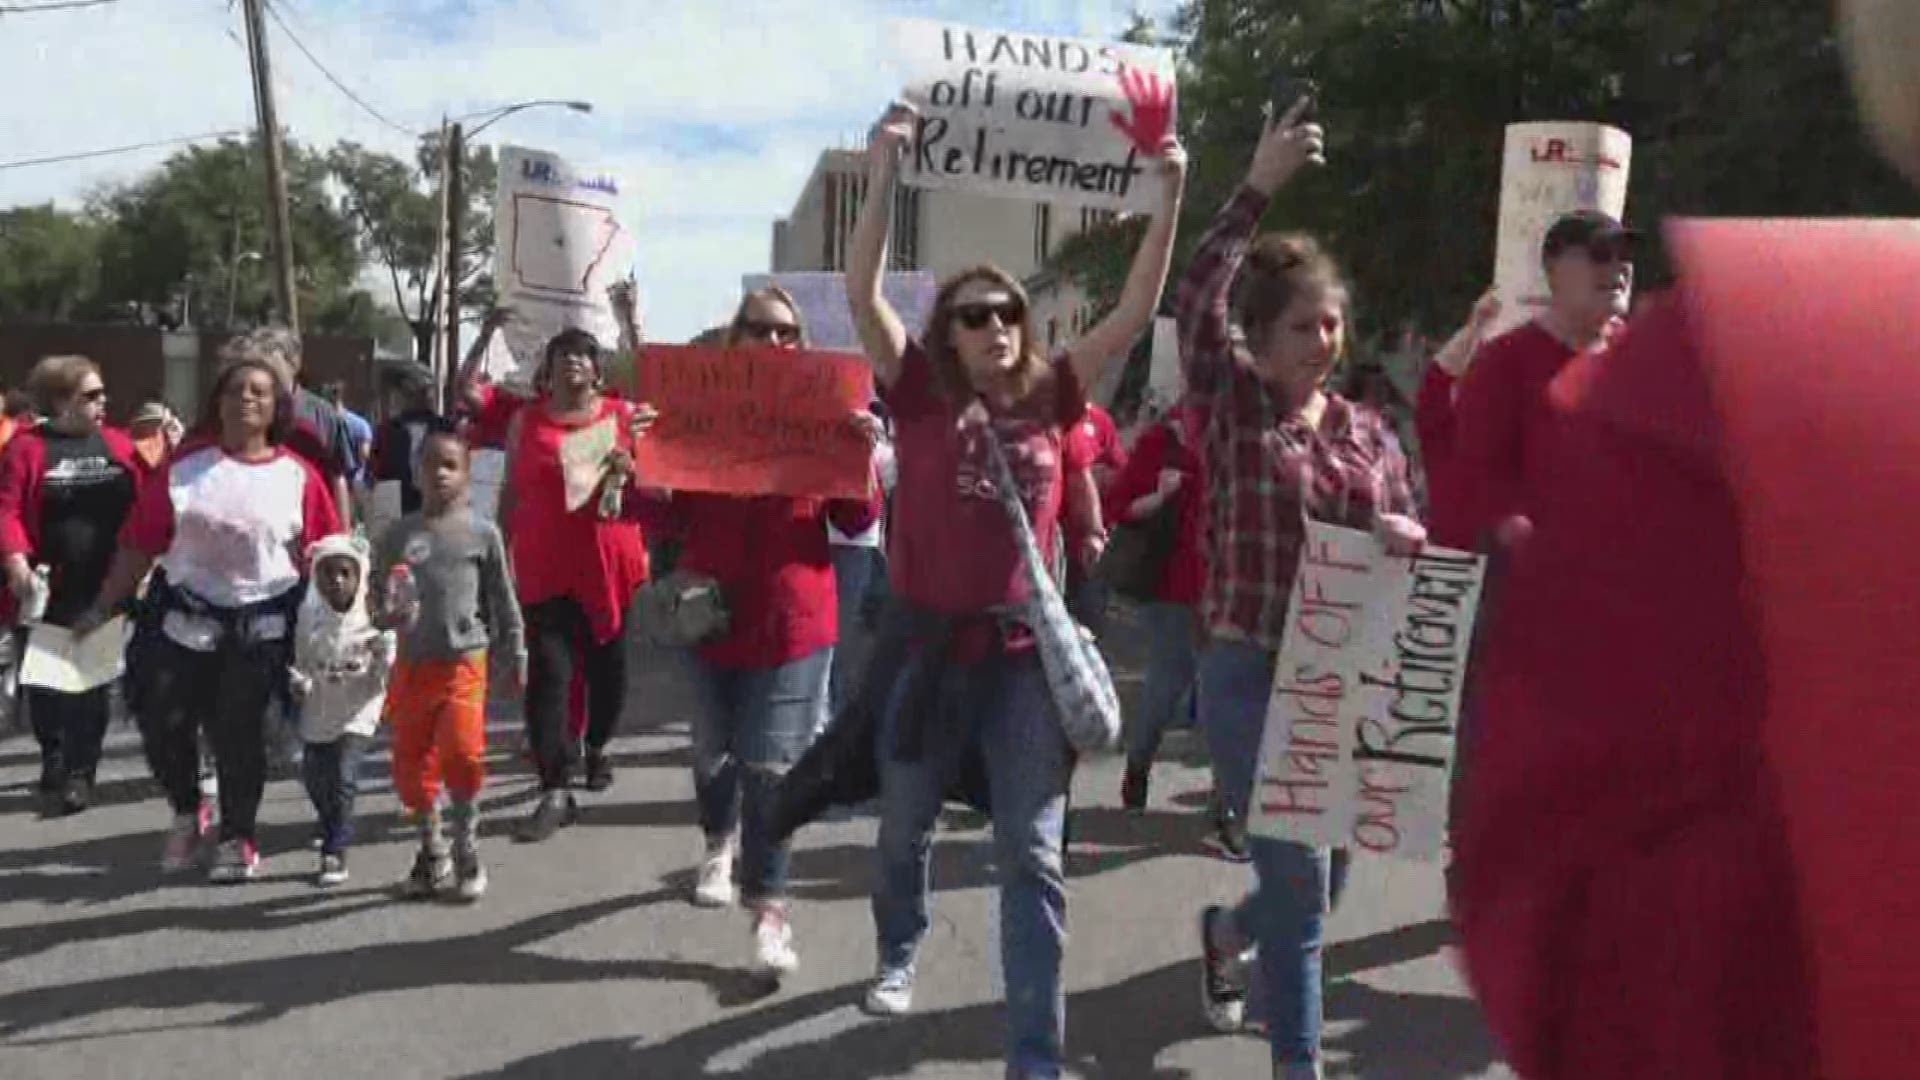 Hundreds of educators, parents, and students from around Arkansas marched to the State Capitol today - to encourage voters to elect politicians friendly to teachers.